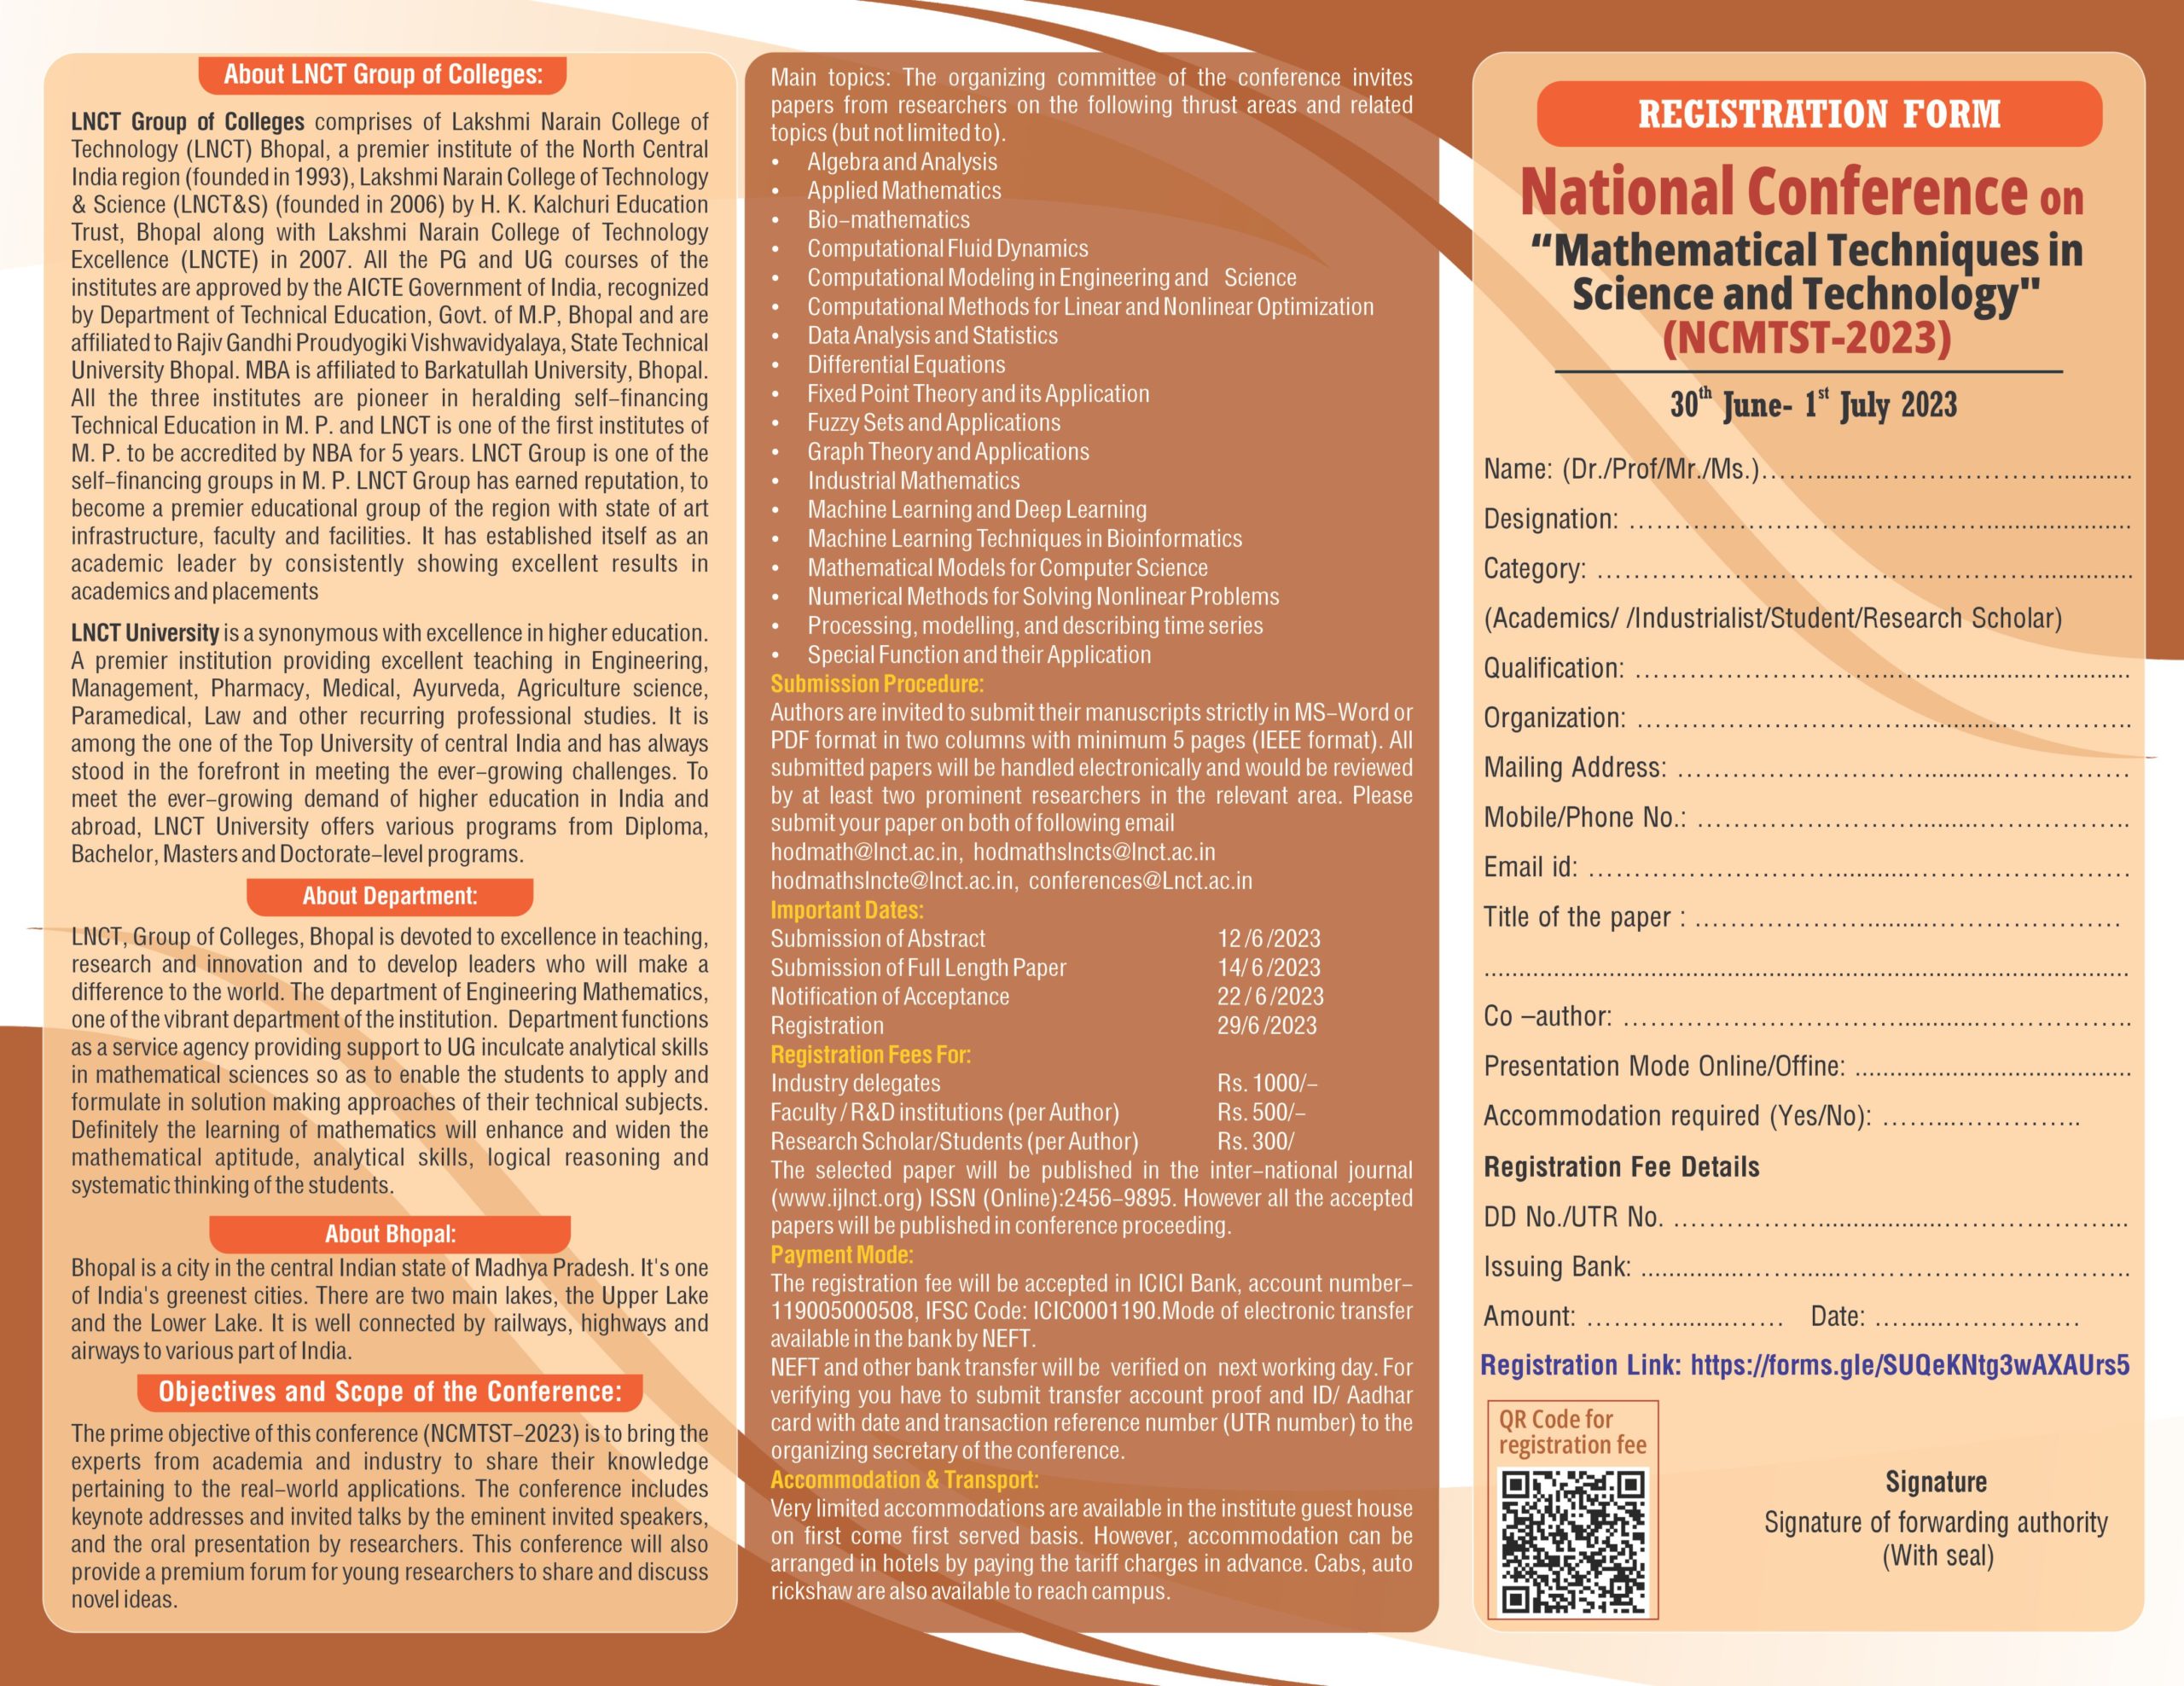 National Conference on Mathematical Techniques in Science and Technology 20